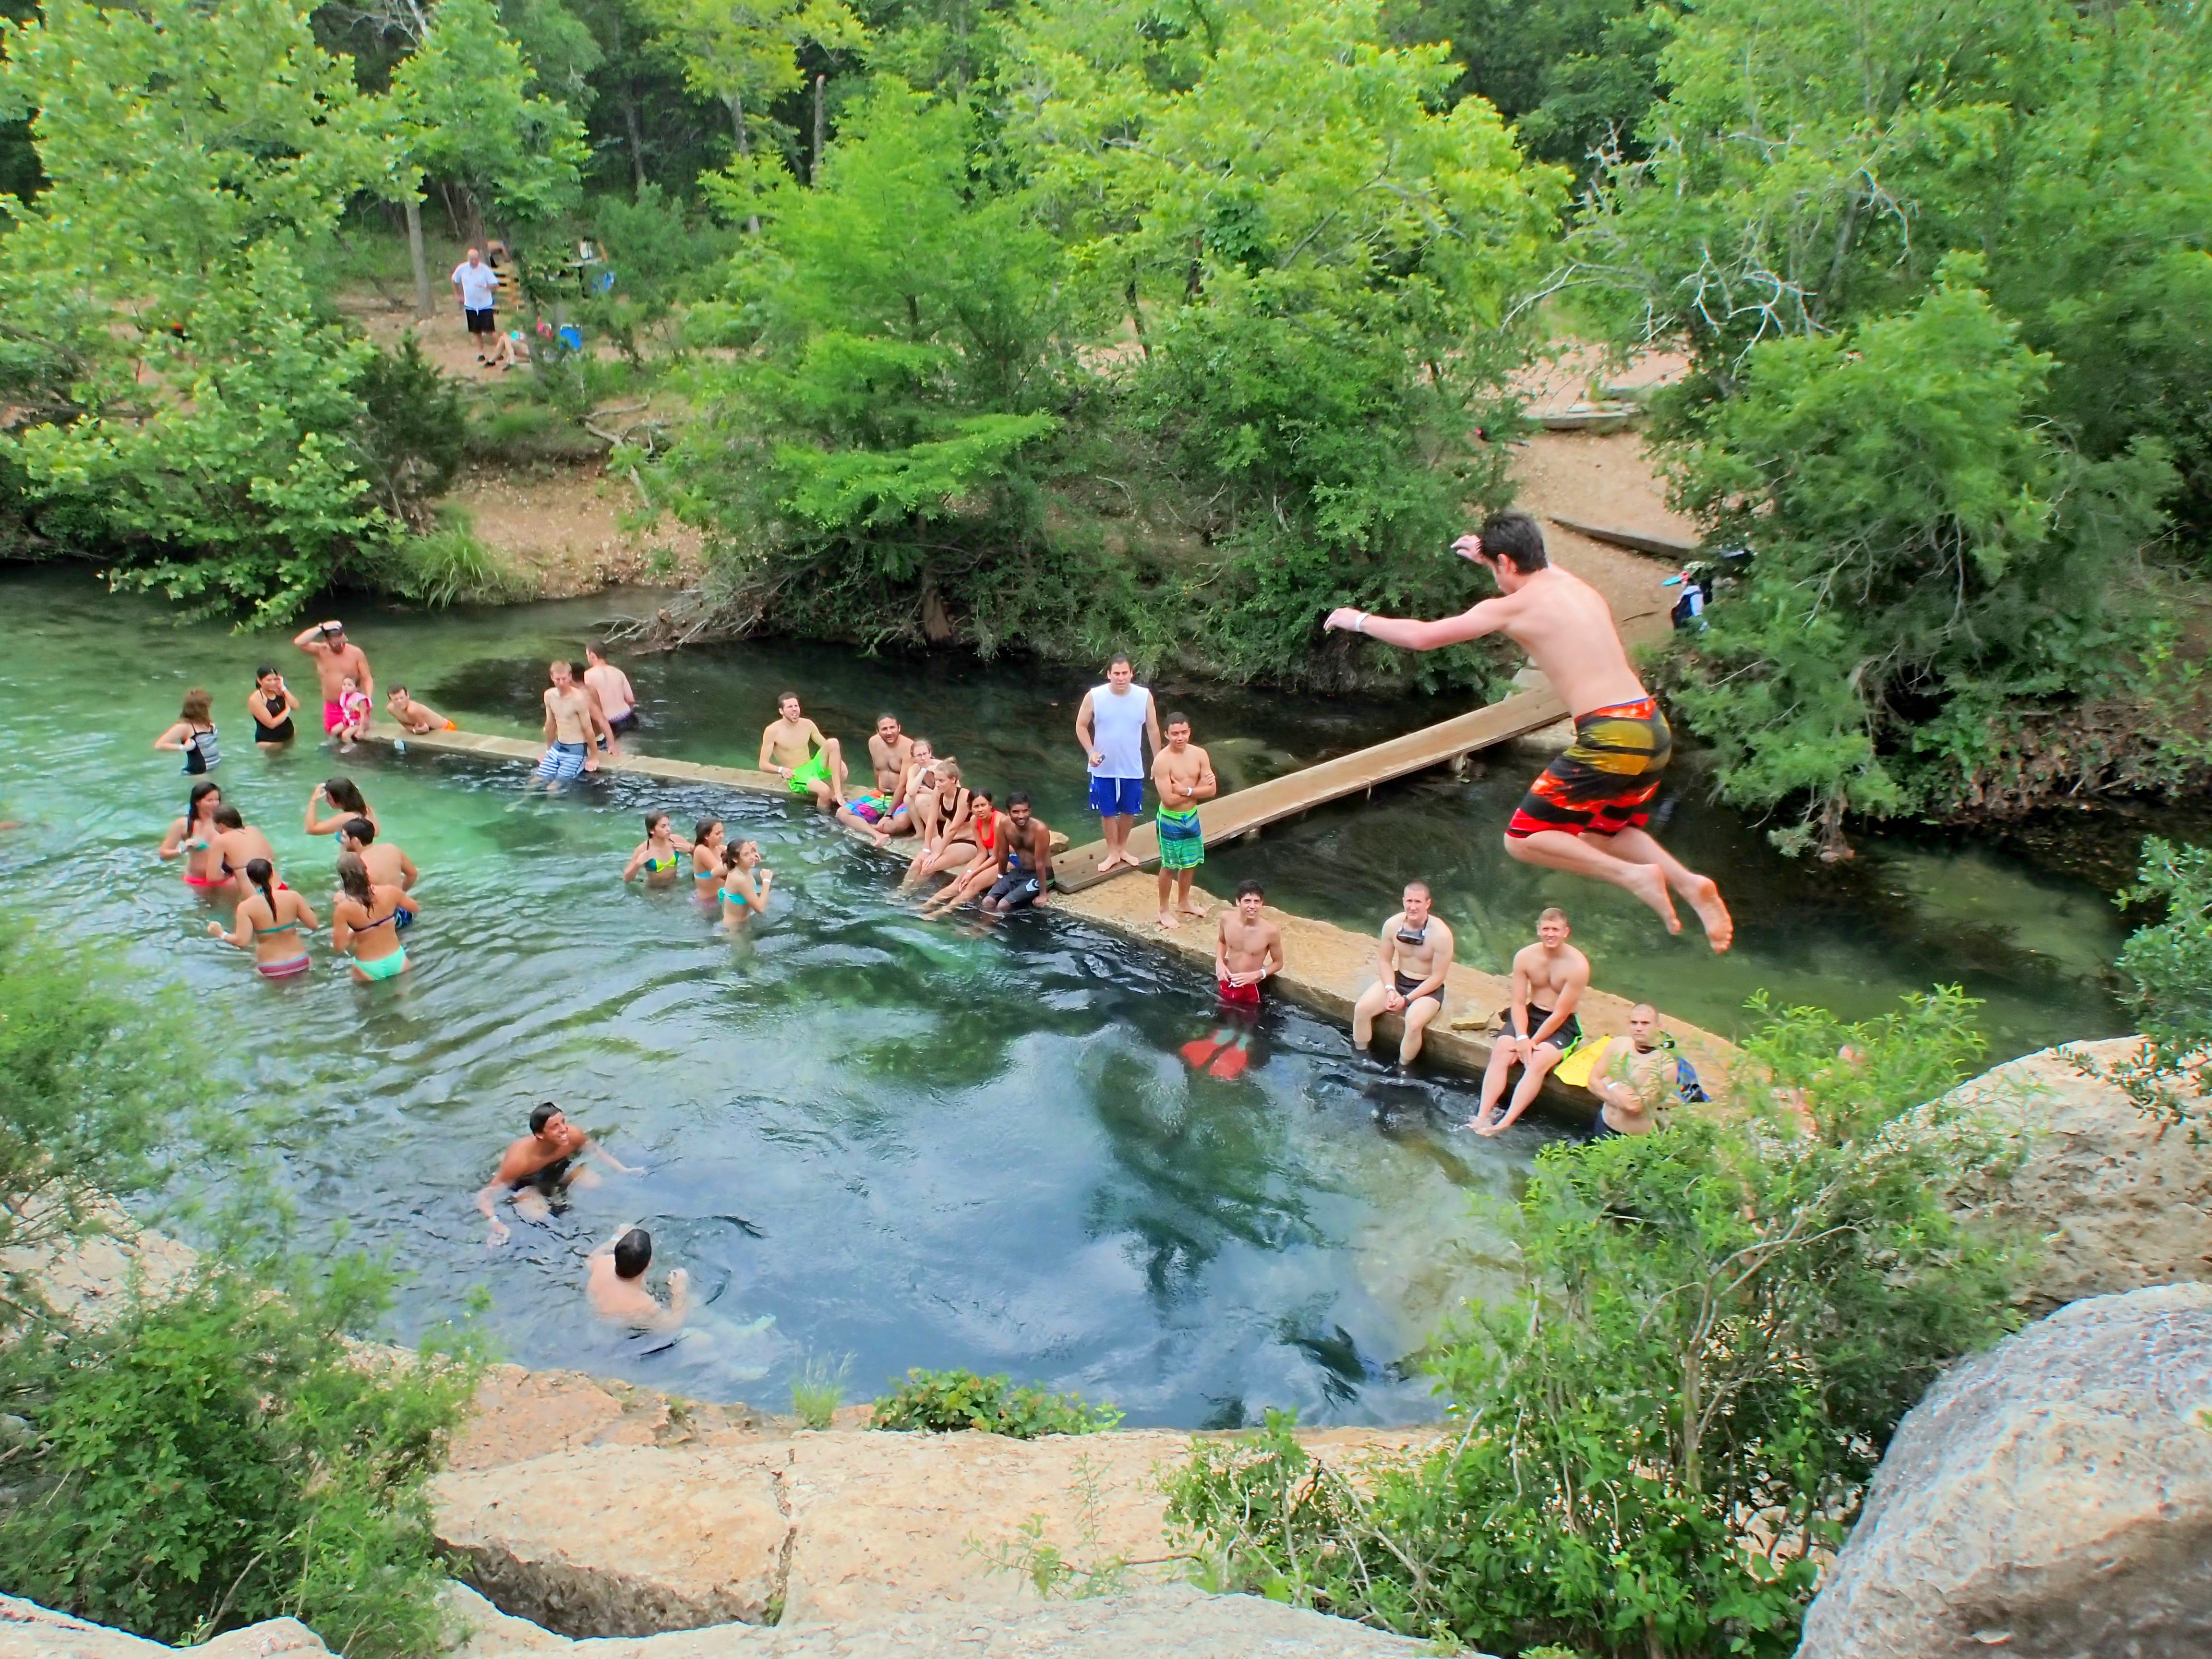 Take the Plunge into Jacob's Well in Wimberley, Texas